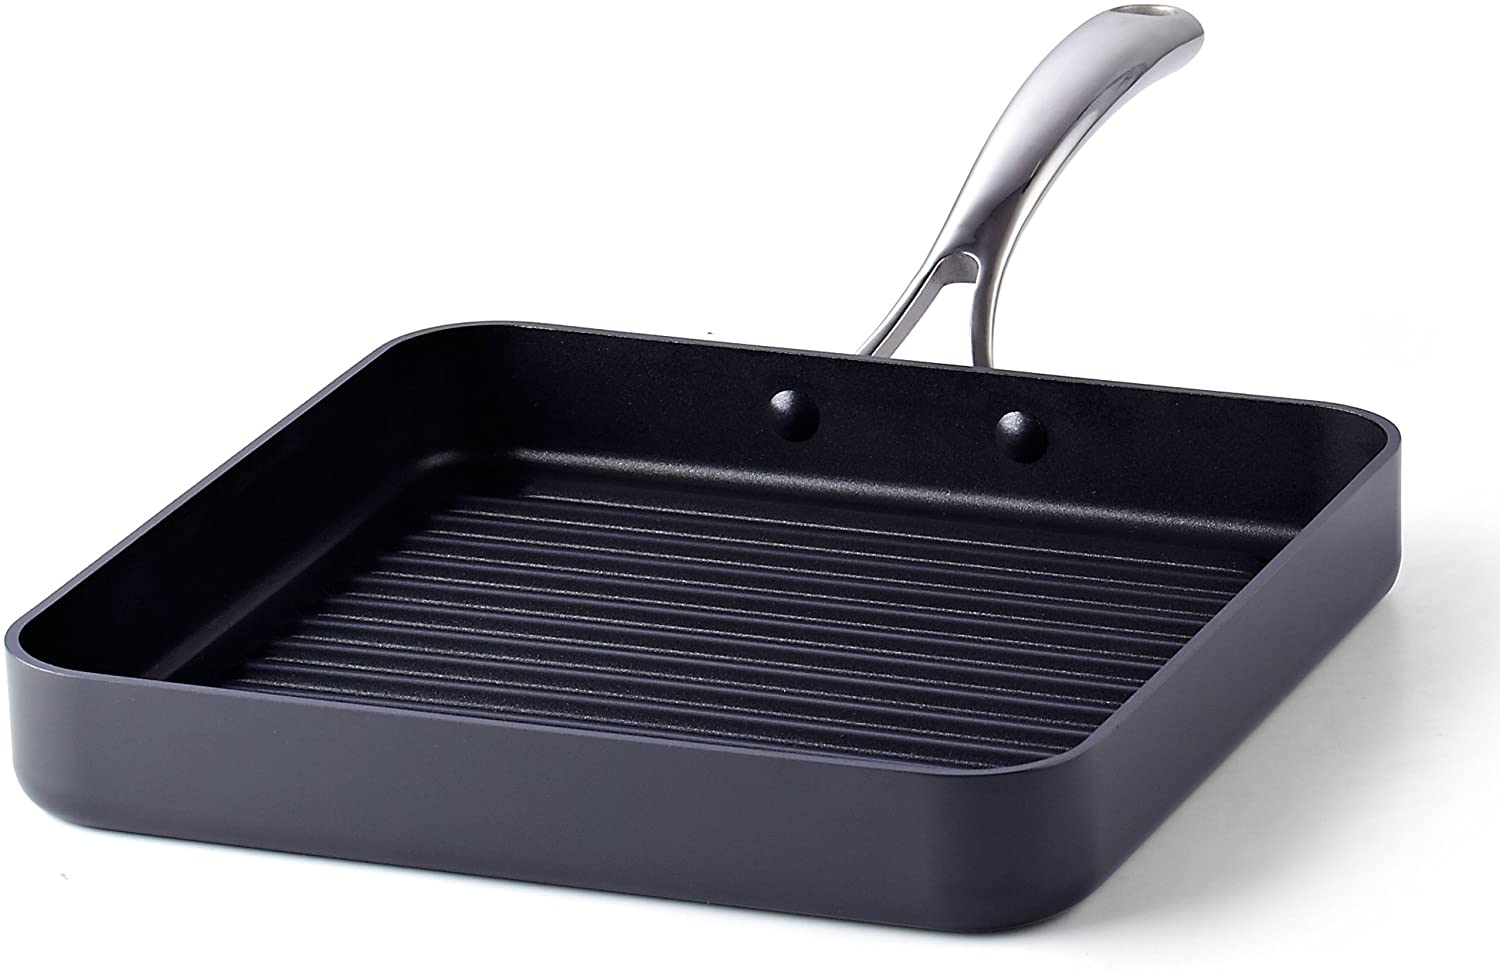  Cooks Standard Nonstick Square Grill Pan 11 x 11-Inch